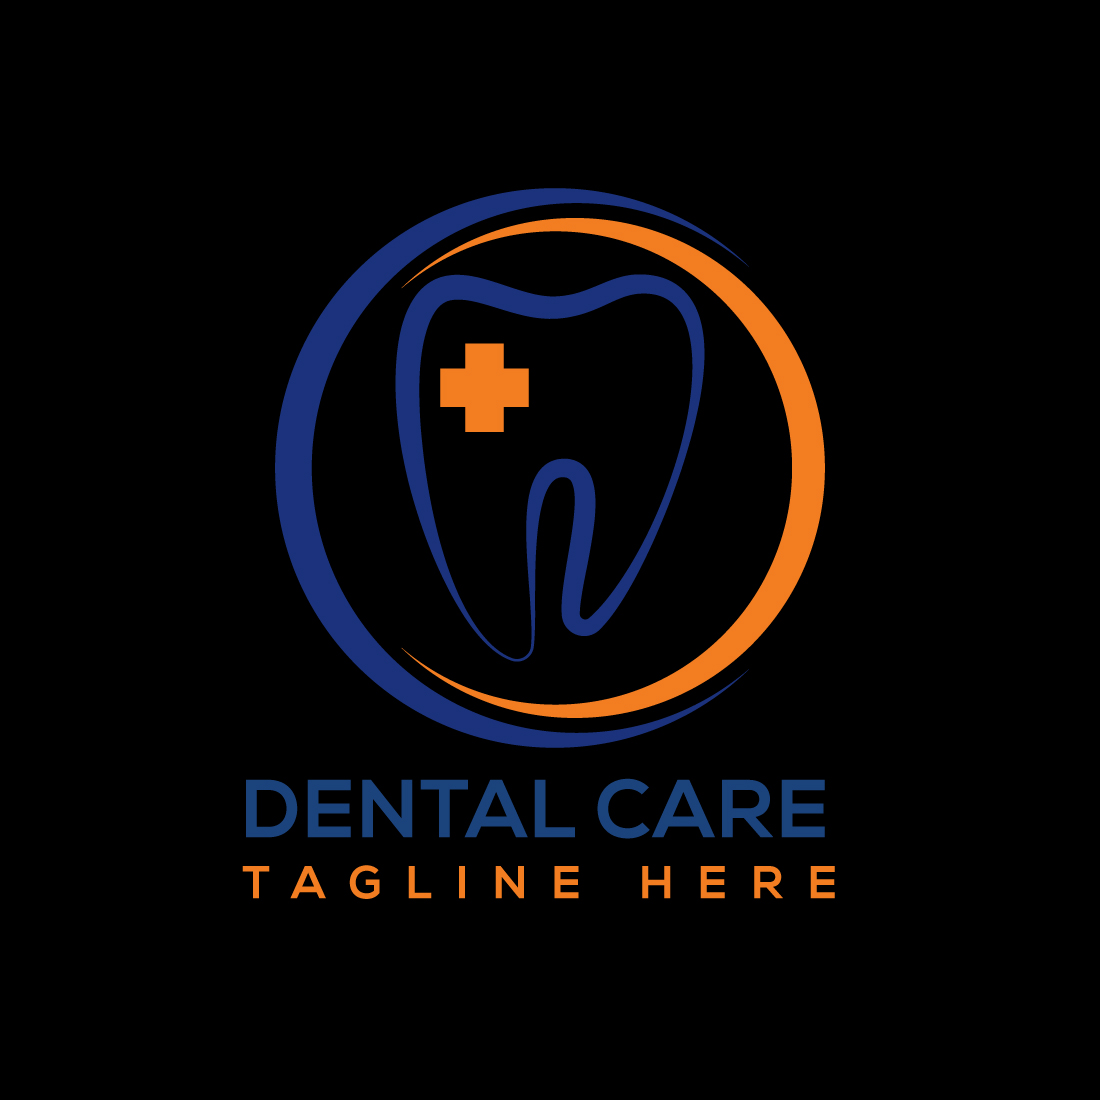 Image of a wonderful logo in the shape of a tooth on a black background.